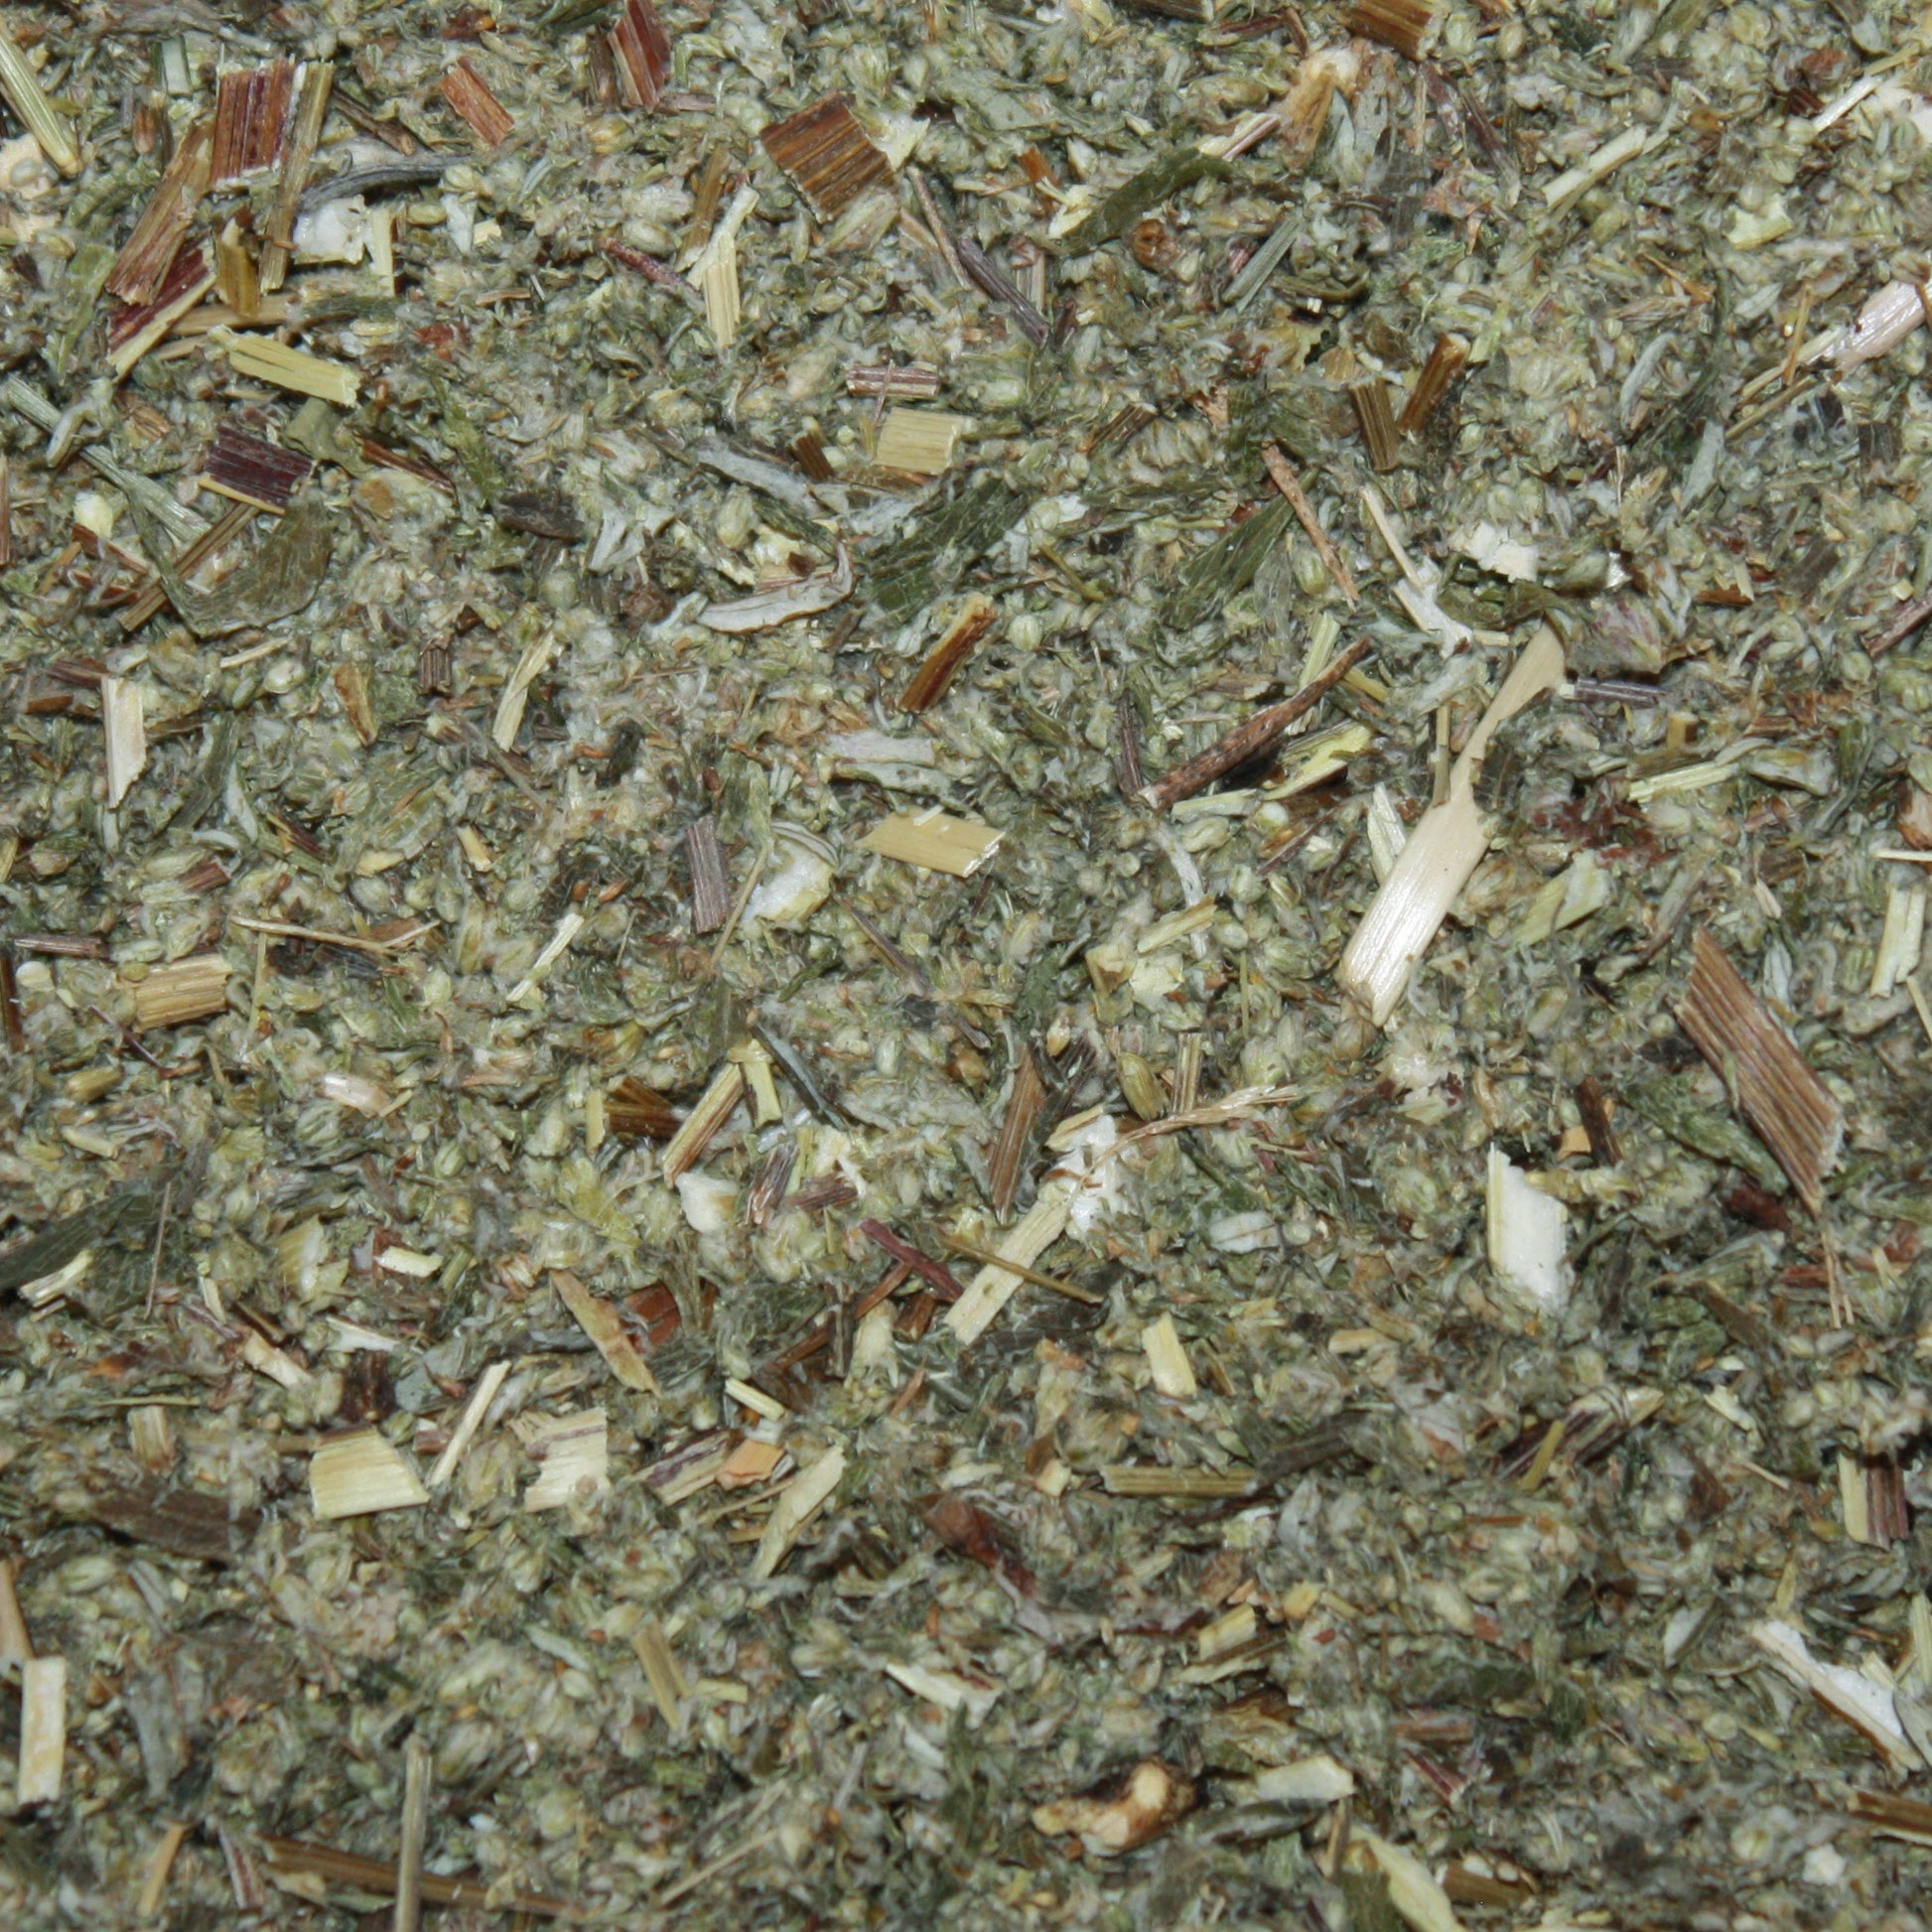 Mugwort is ideal for Pain Relief, Lust, Passion